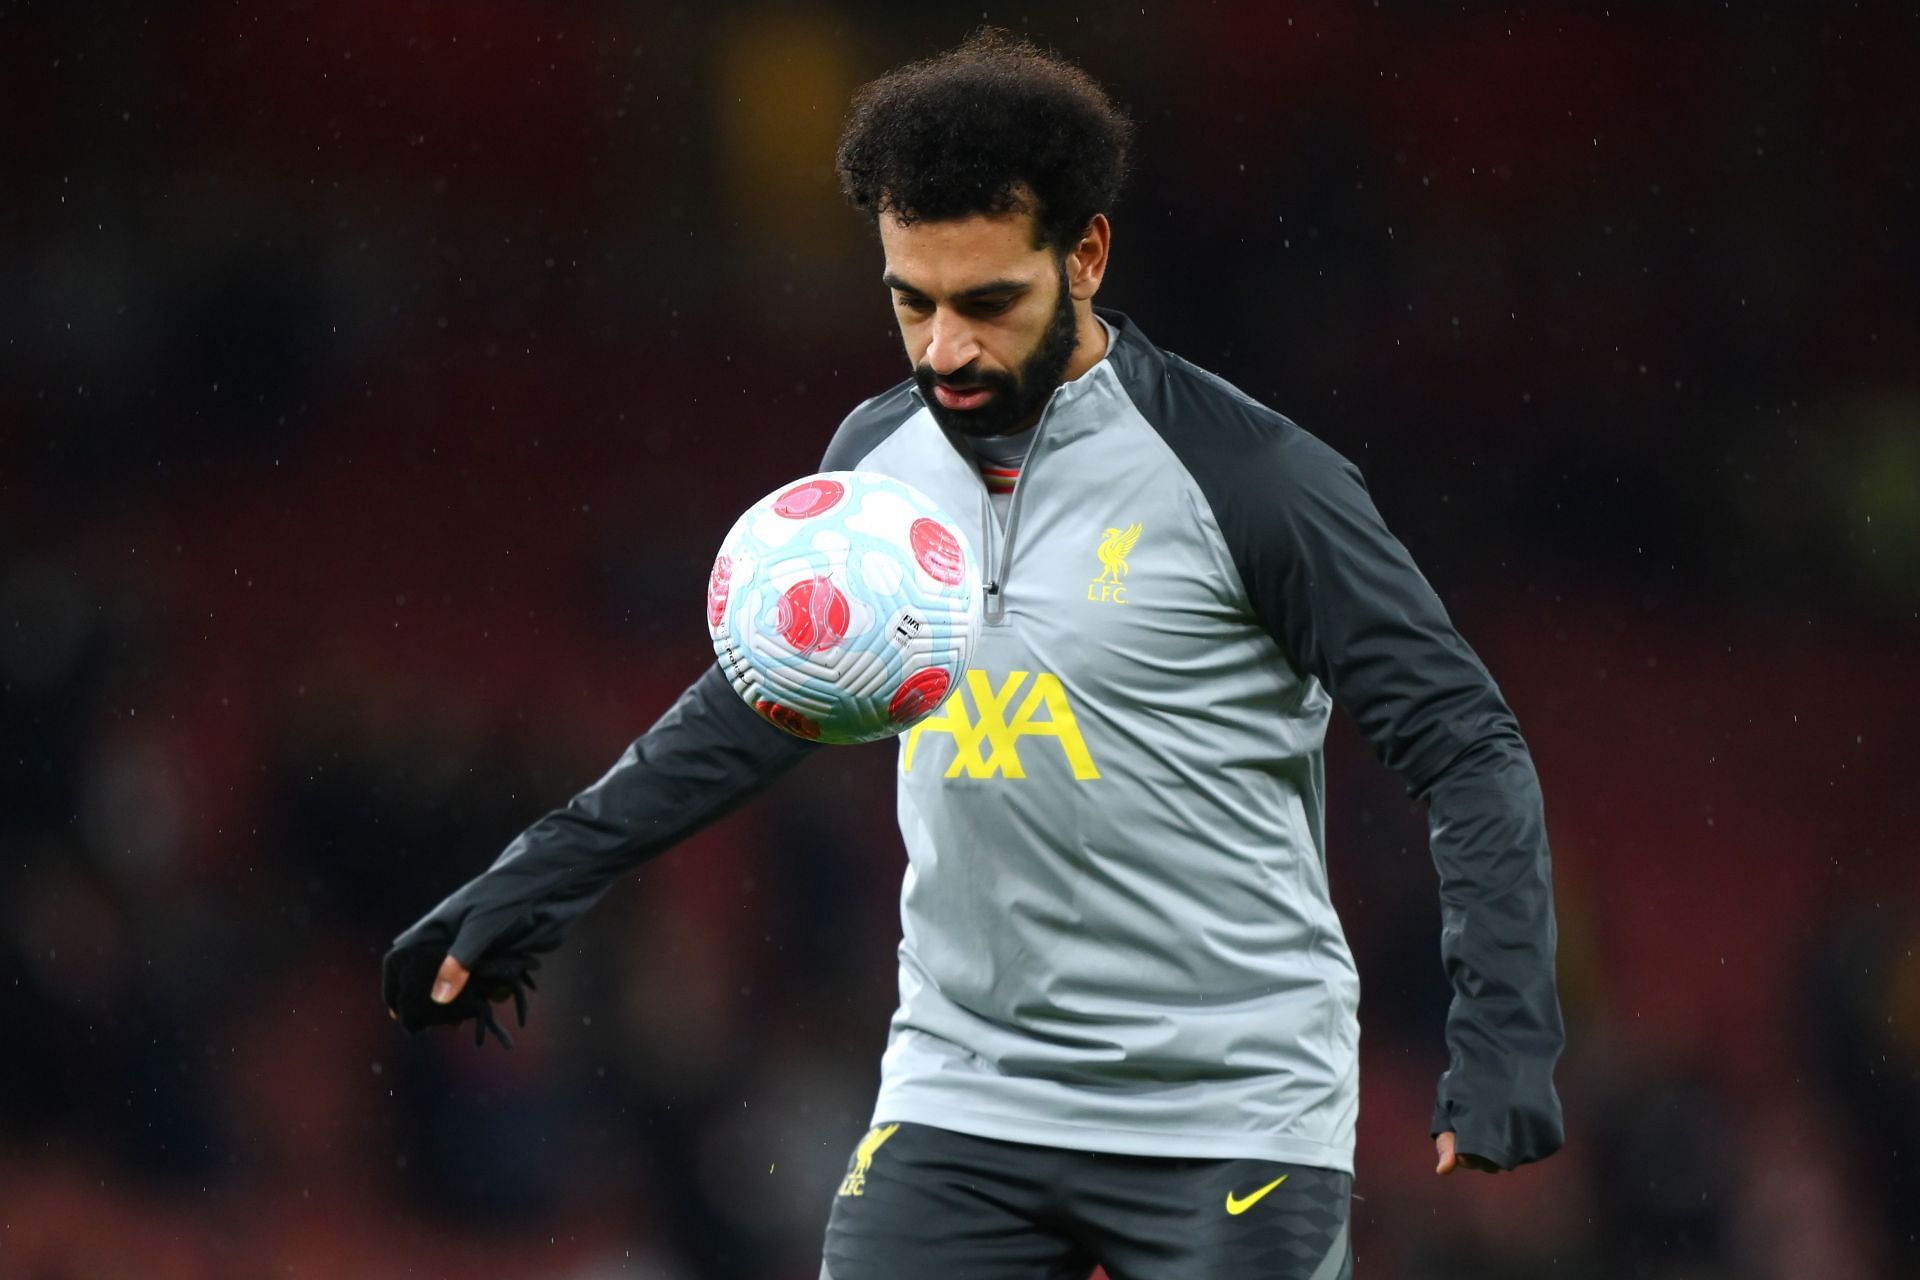 Mohamed Salah looks set to stay at Anfield for the near future.